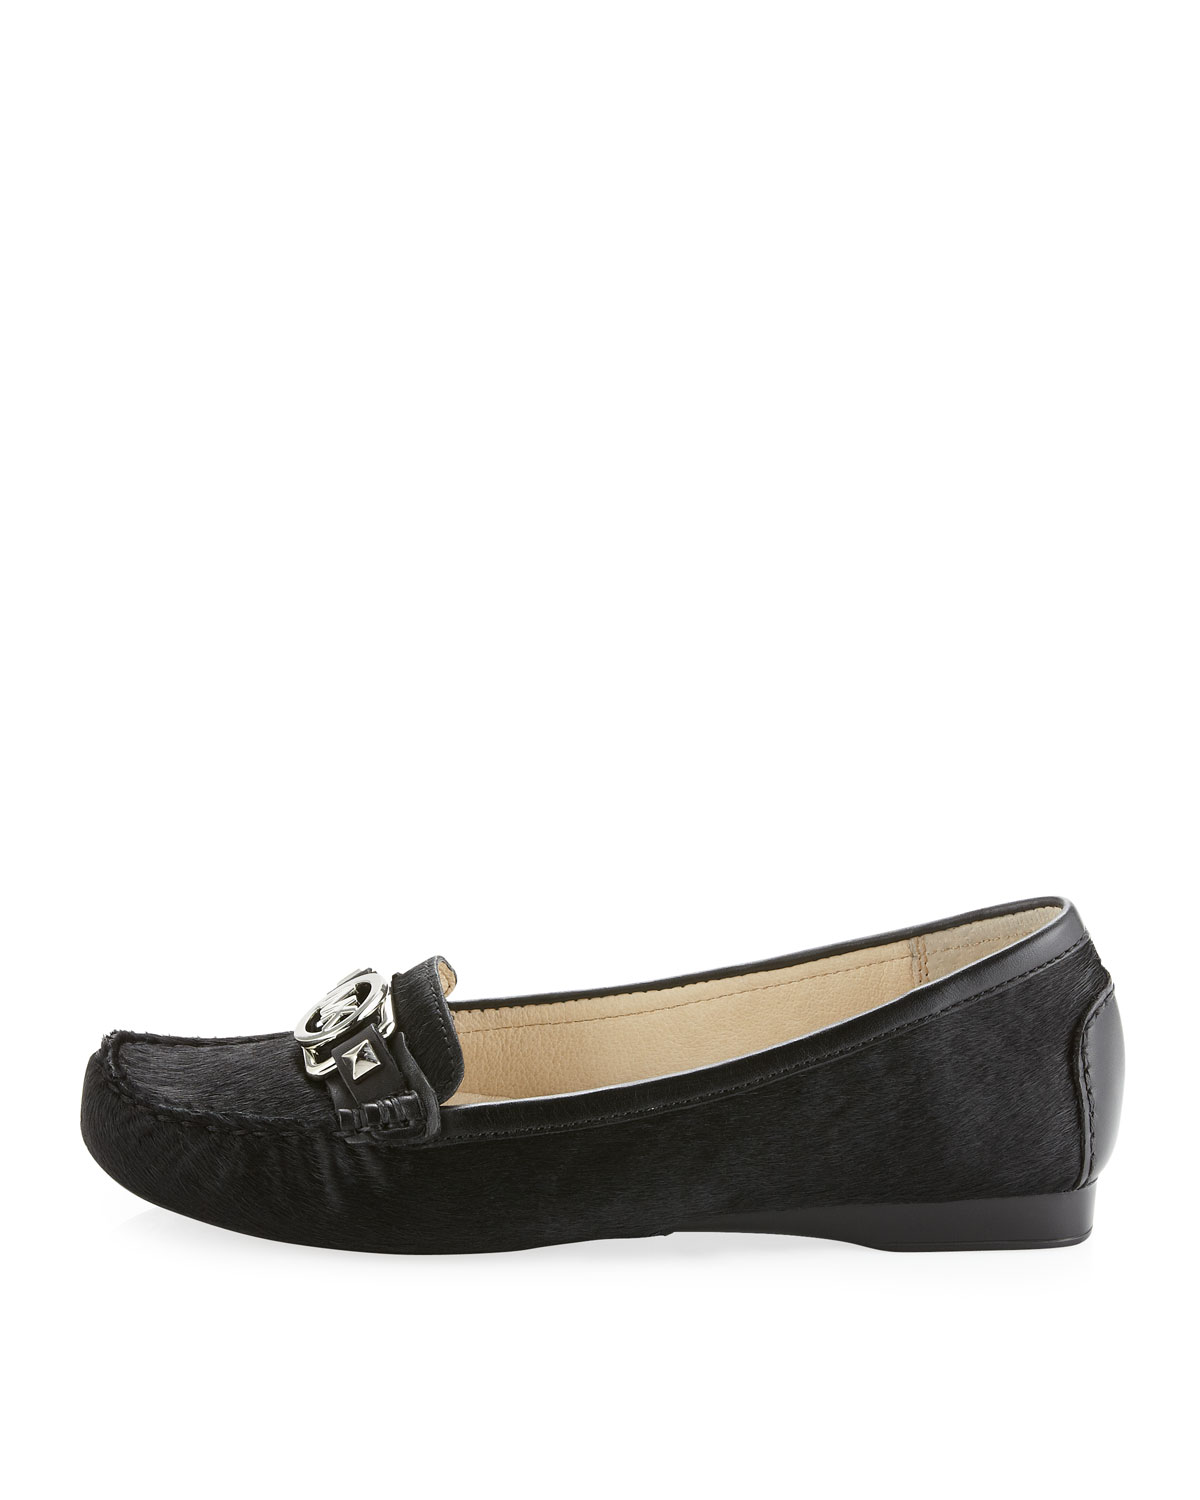 Michael Kors Charm Moccasin in Black | Lyst